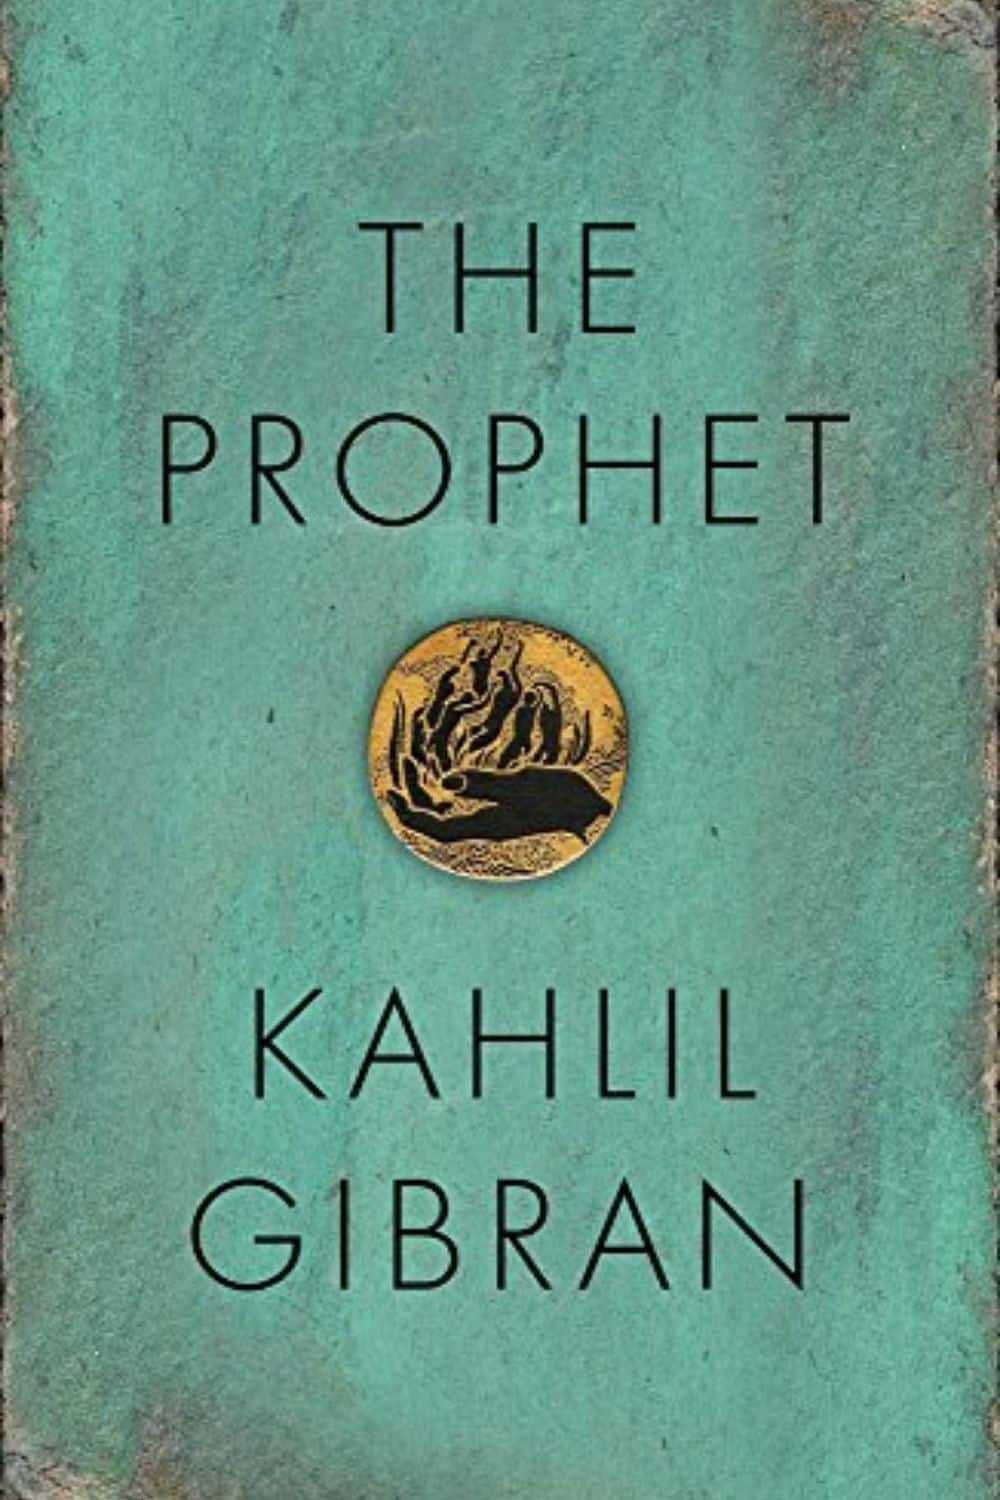 Book Recommendations For All Moods (The Prophet)